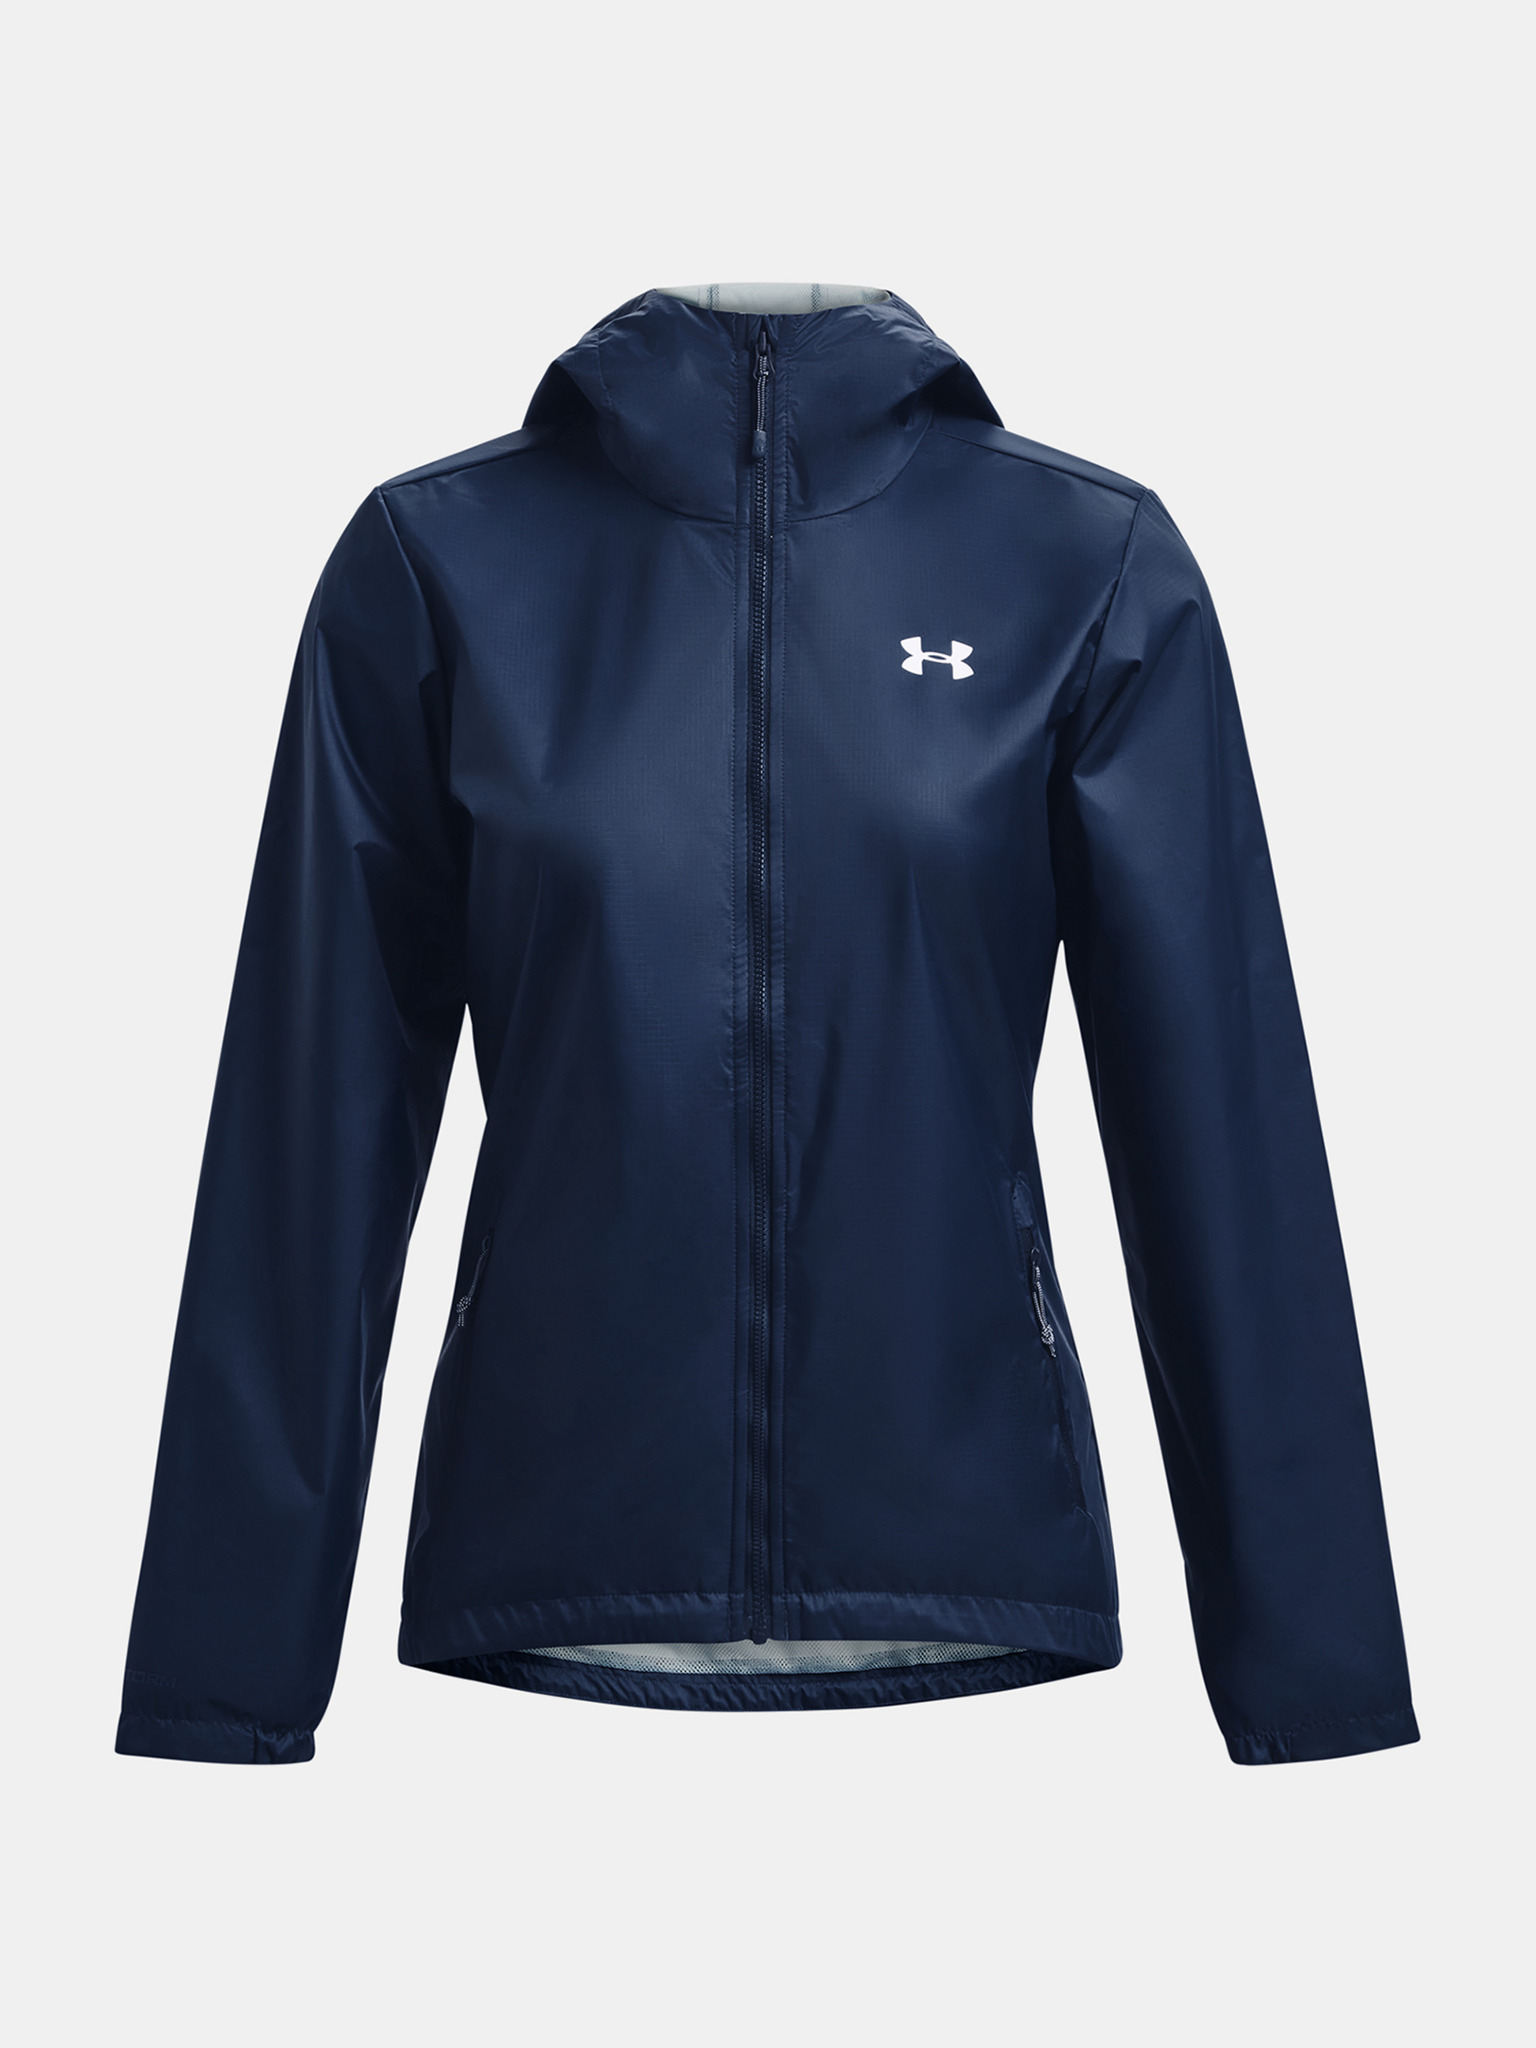 Under Armour Women's Storm Rain Jacket - My Cooling Store